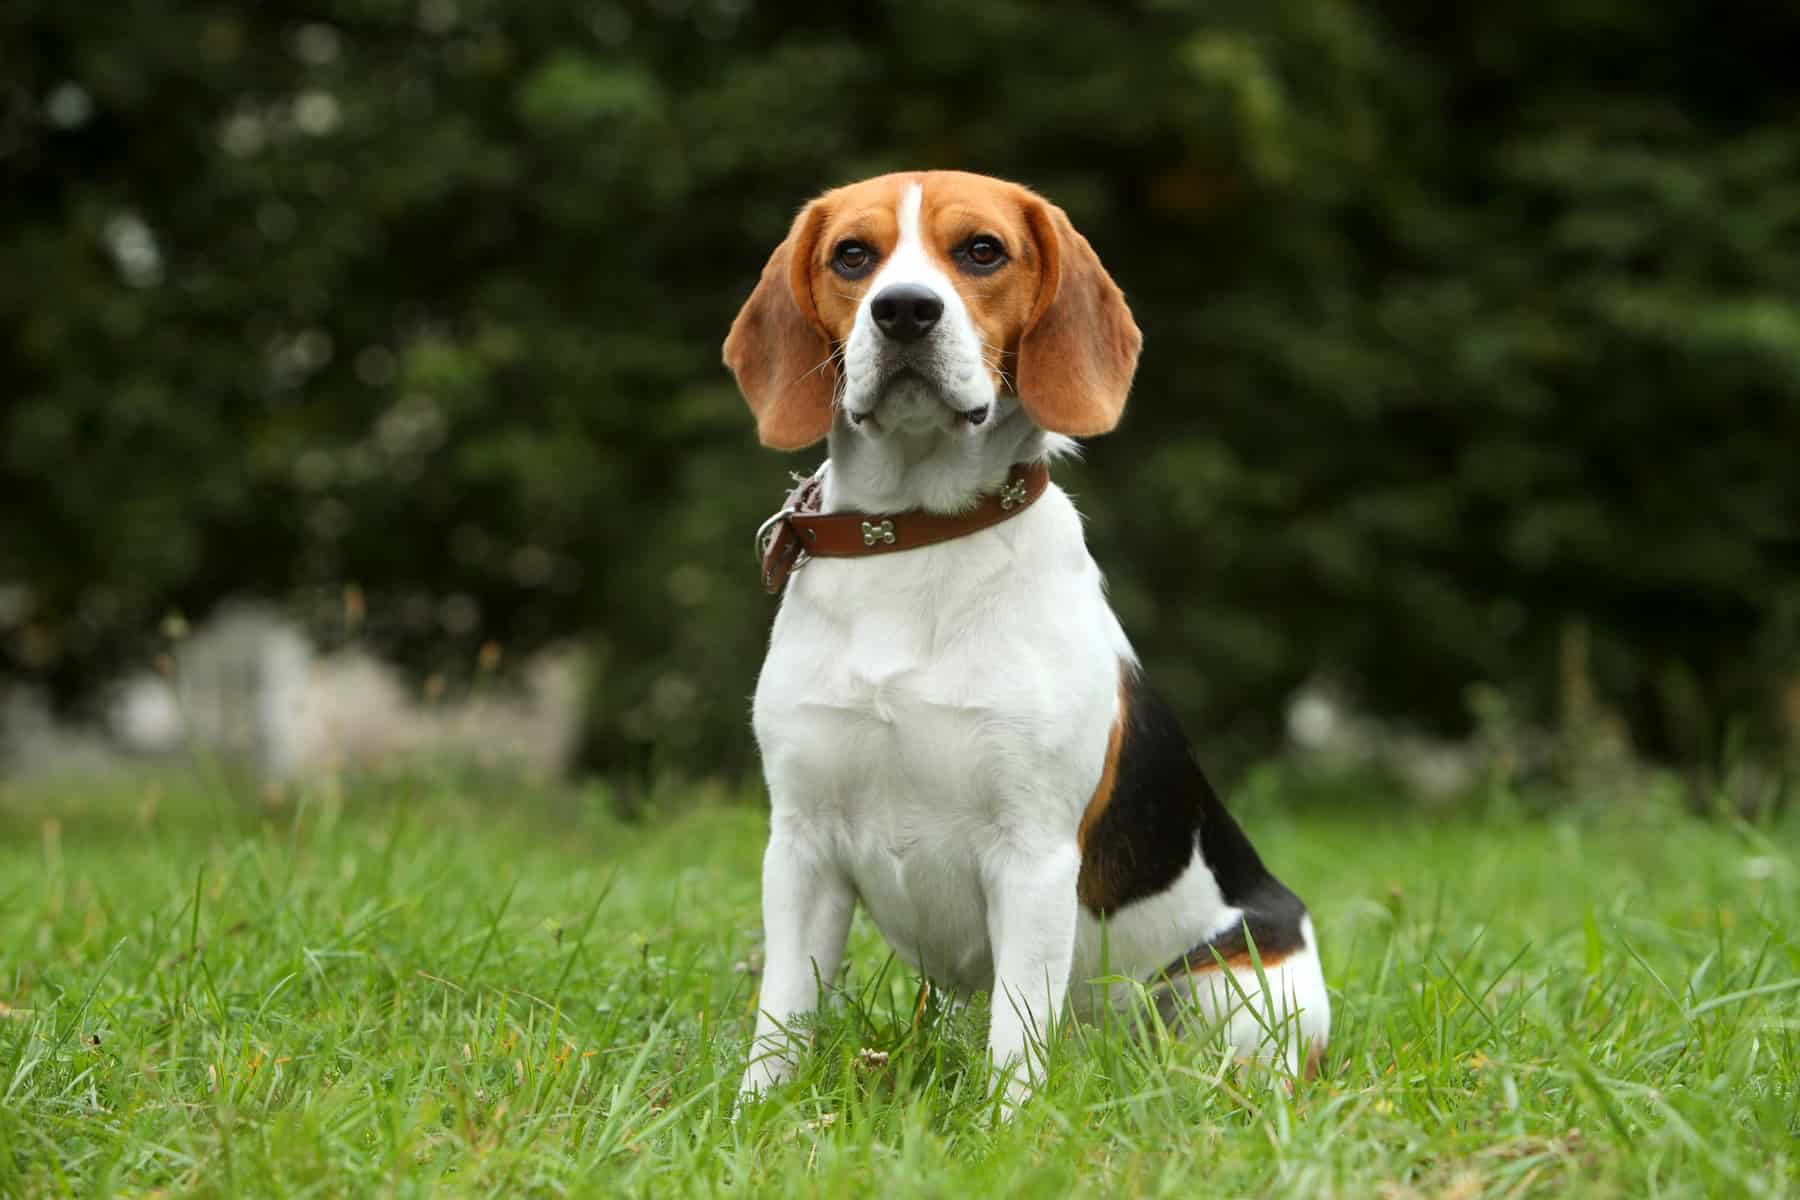 Are Beagliers smaller than Beagles?